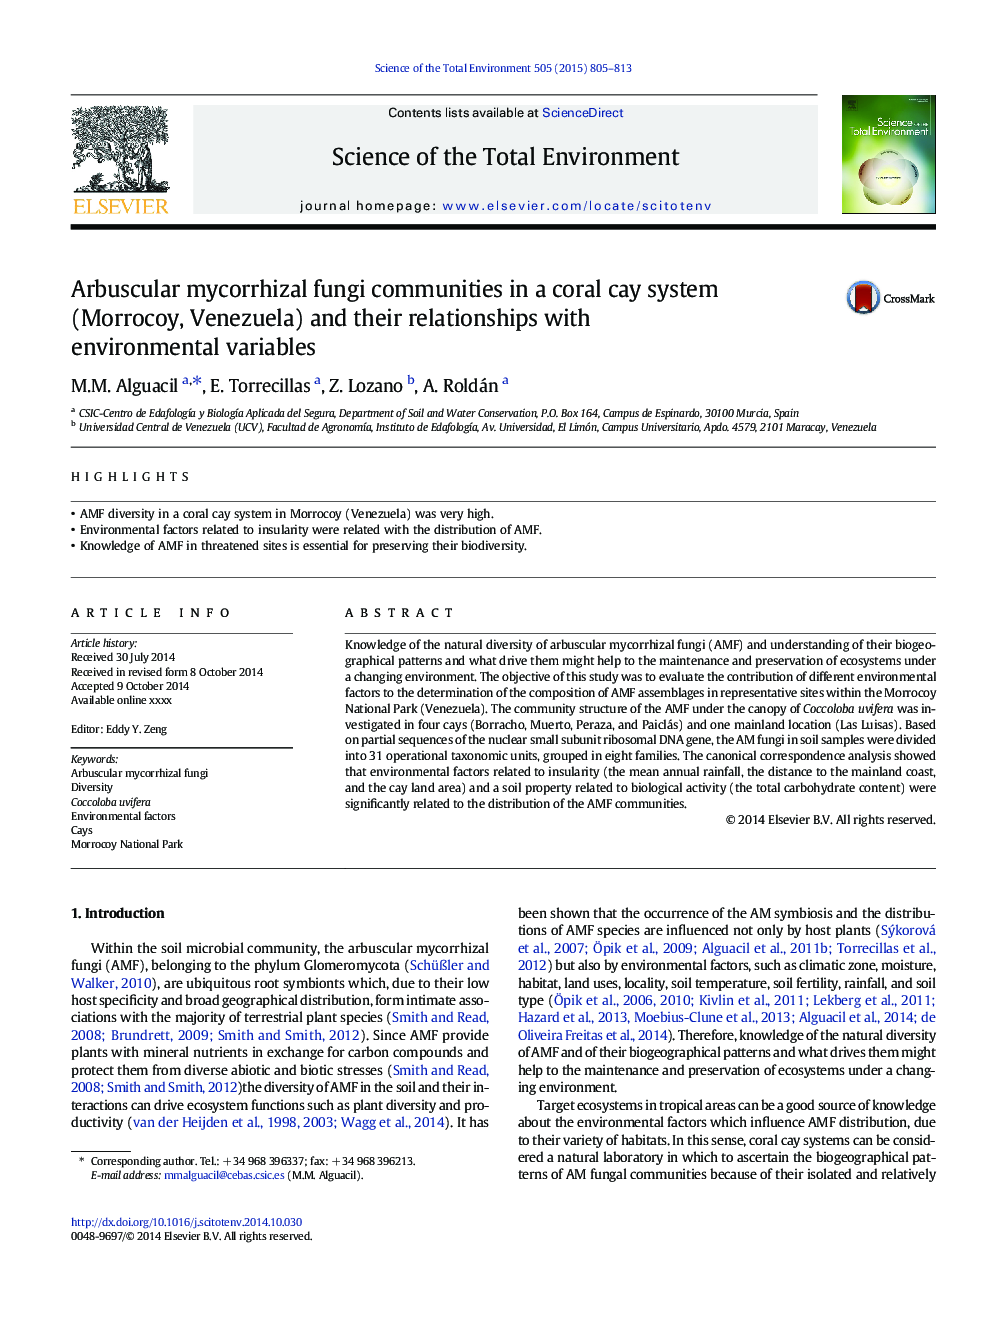 Arbuscular mycorrhizal fungi communities in a coral cay system (Morrocoy, Venezuela) and their relationships with environmental variables